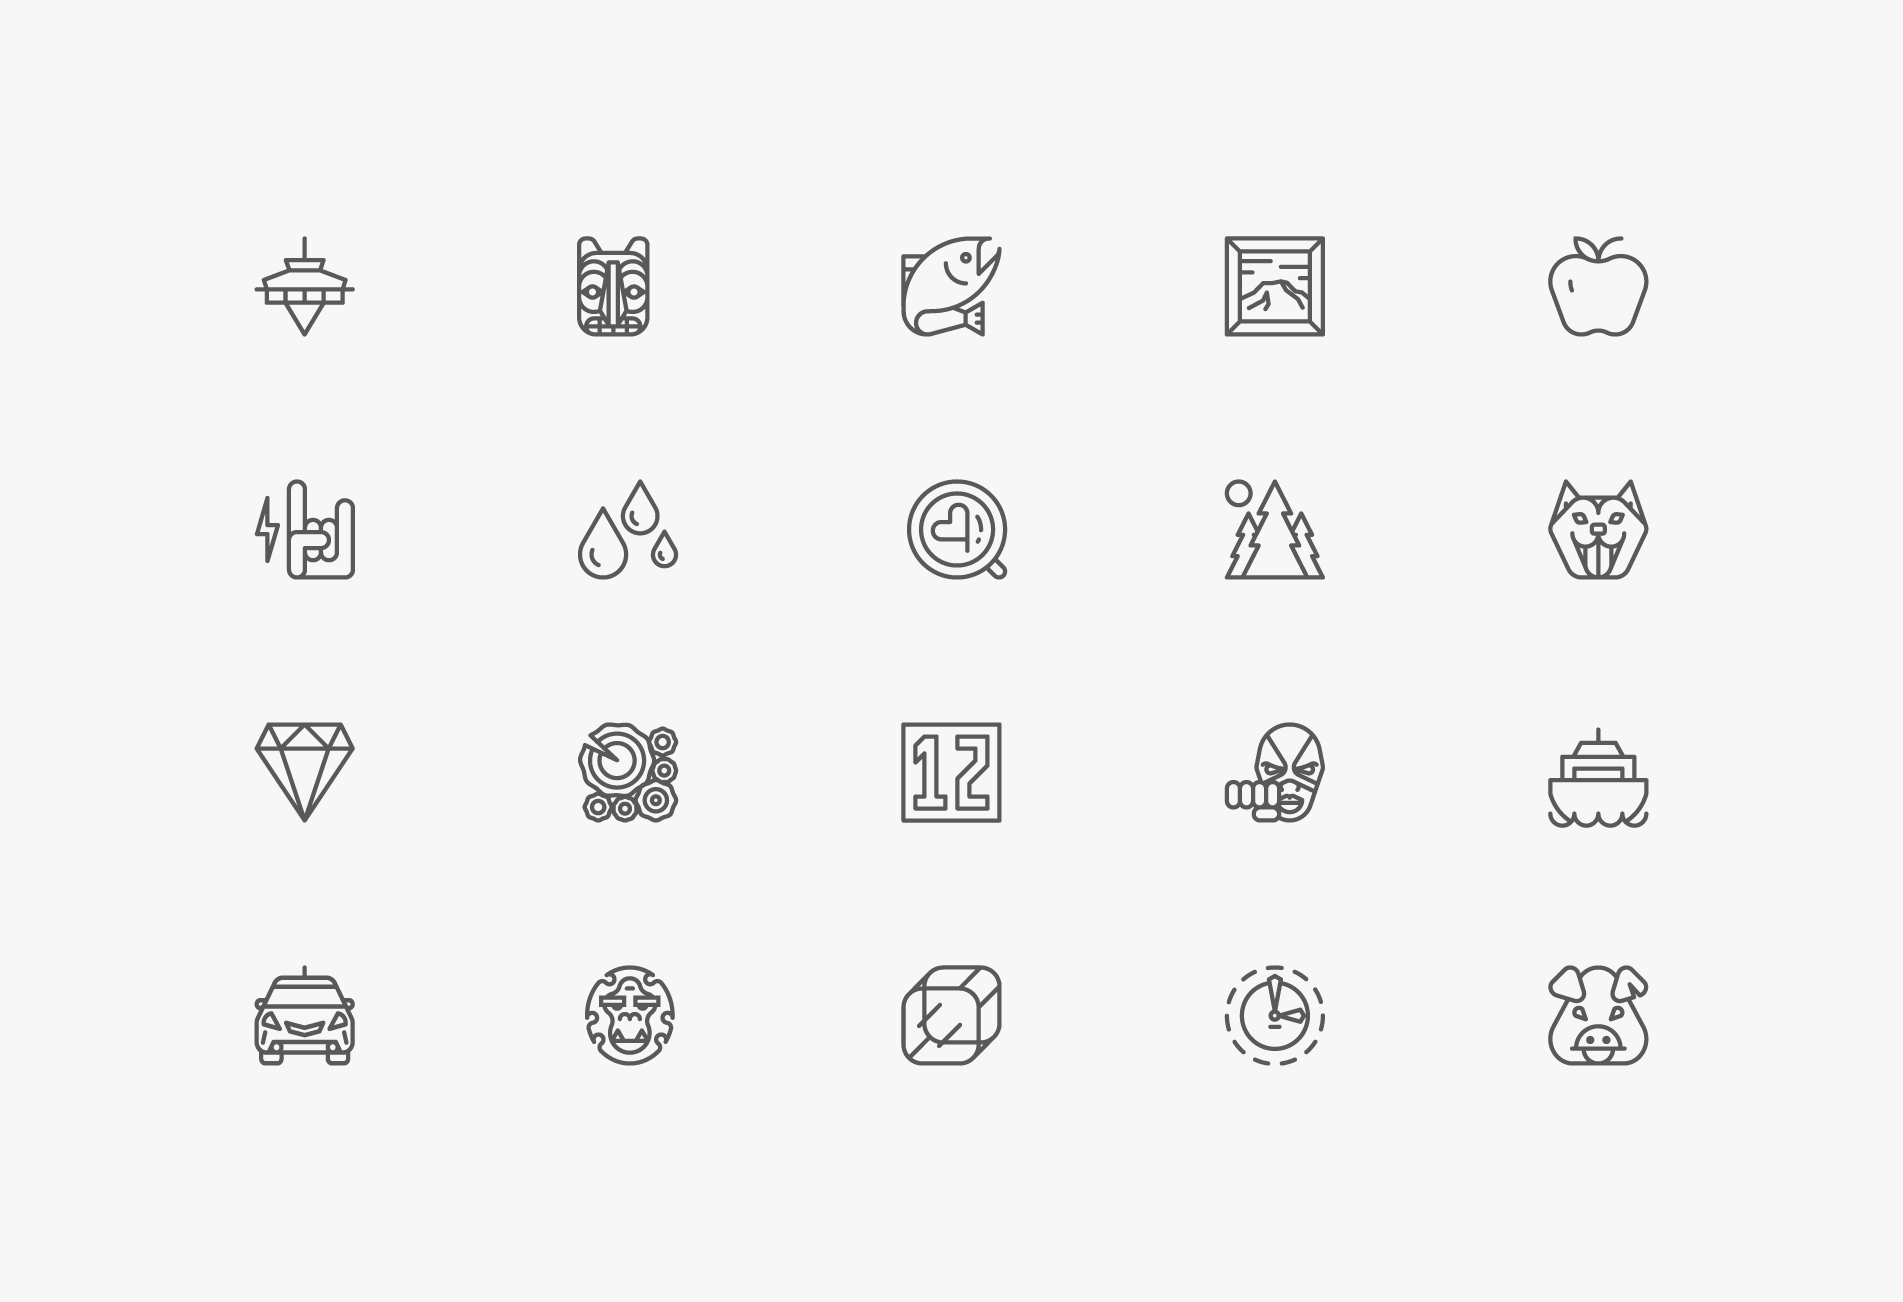 Download these icons at The Noun Project.﻿